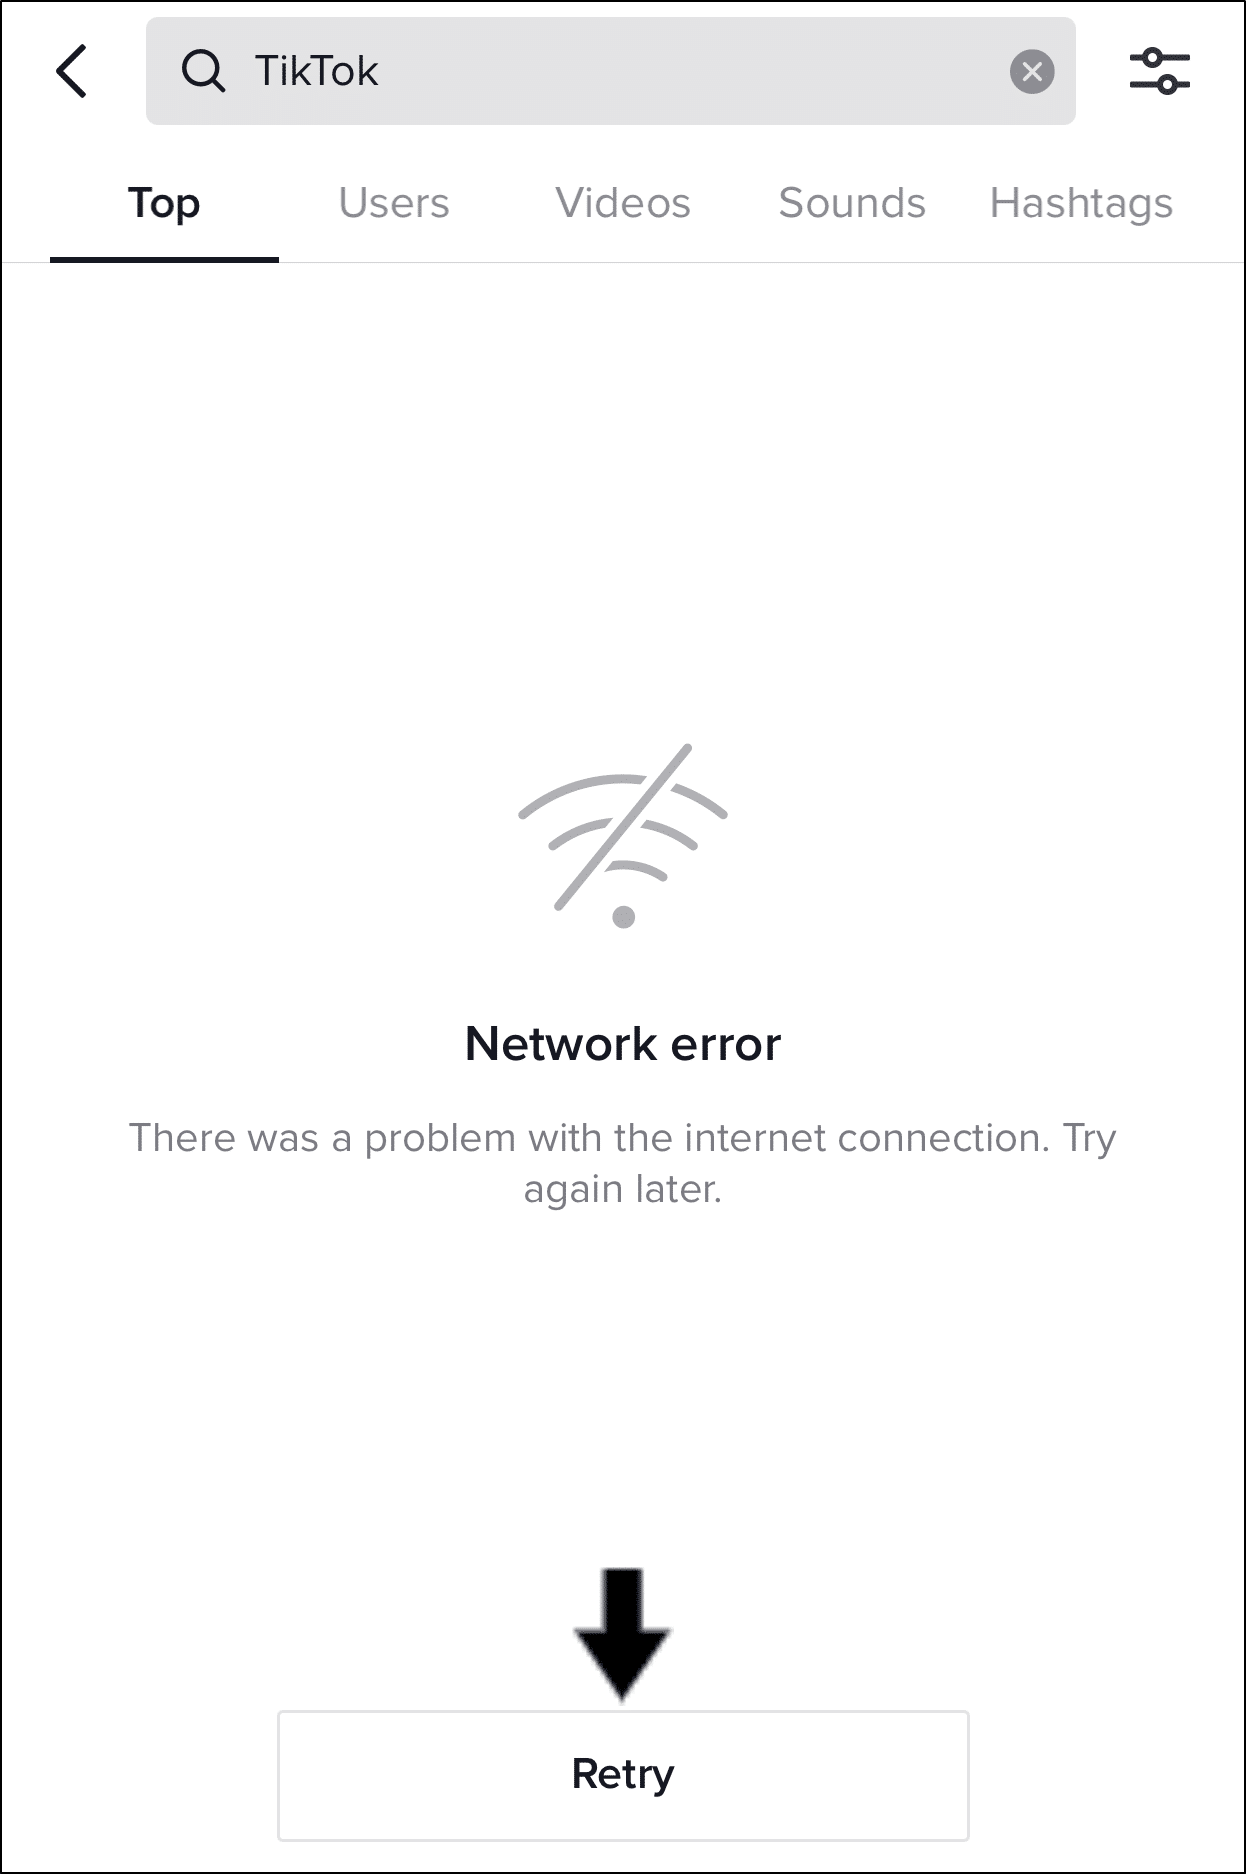 tiktok search bar not working, network error or unavailable